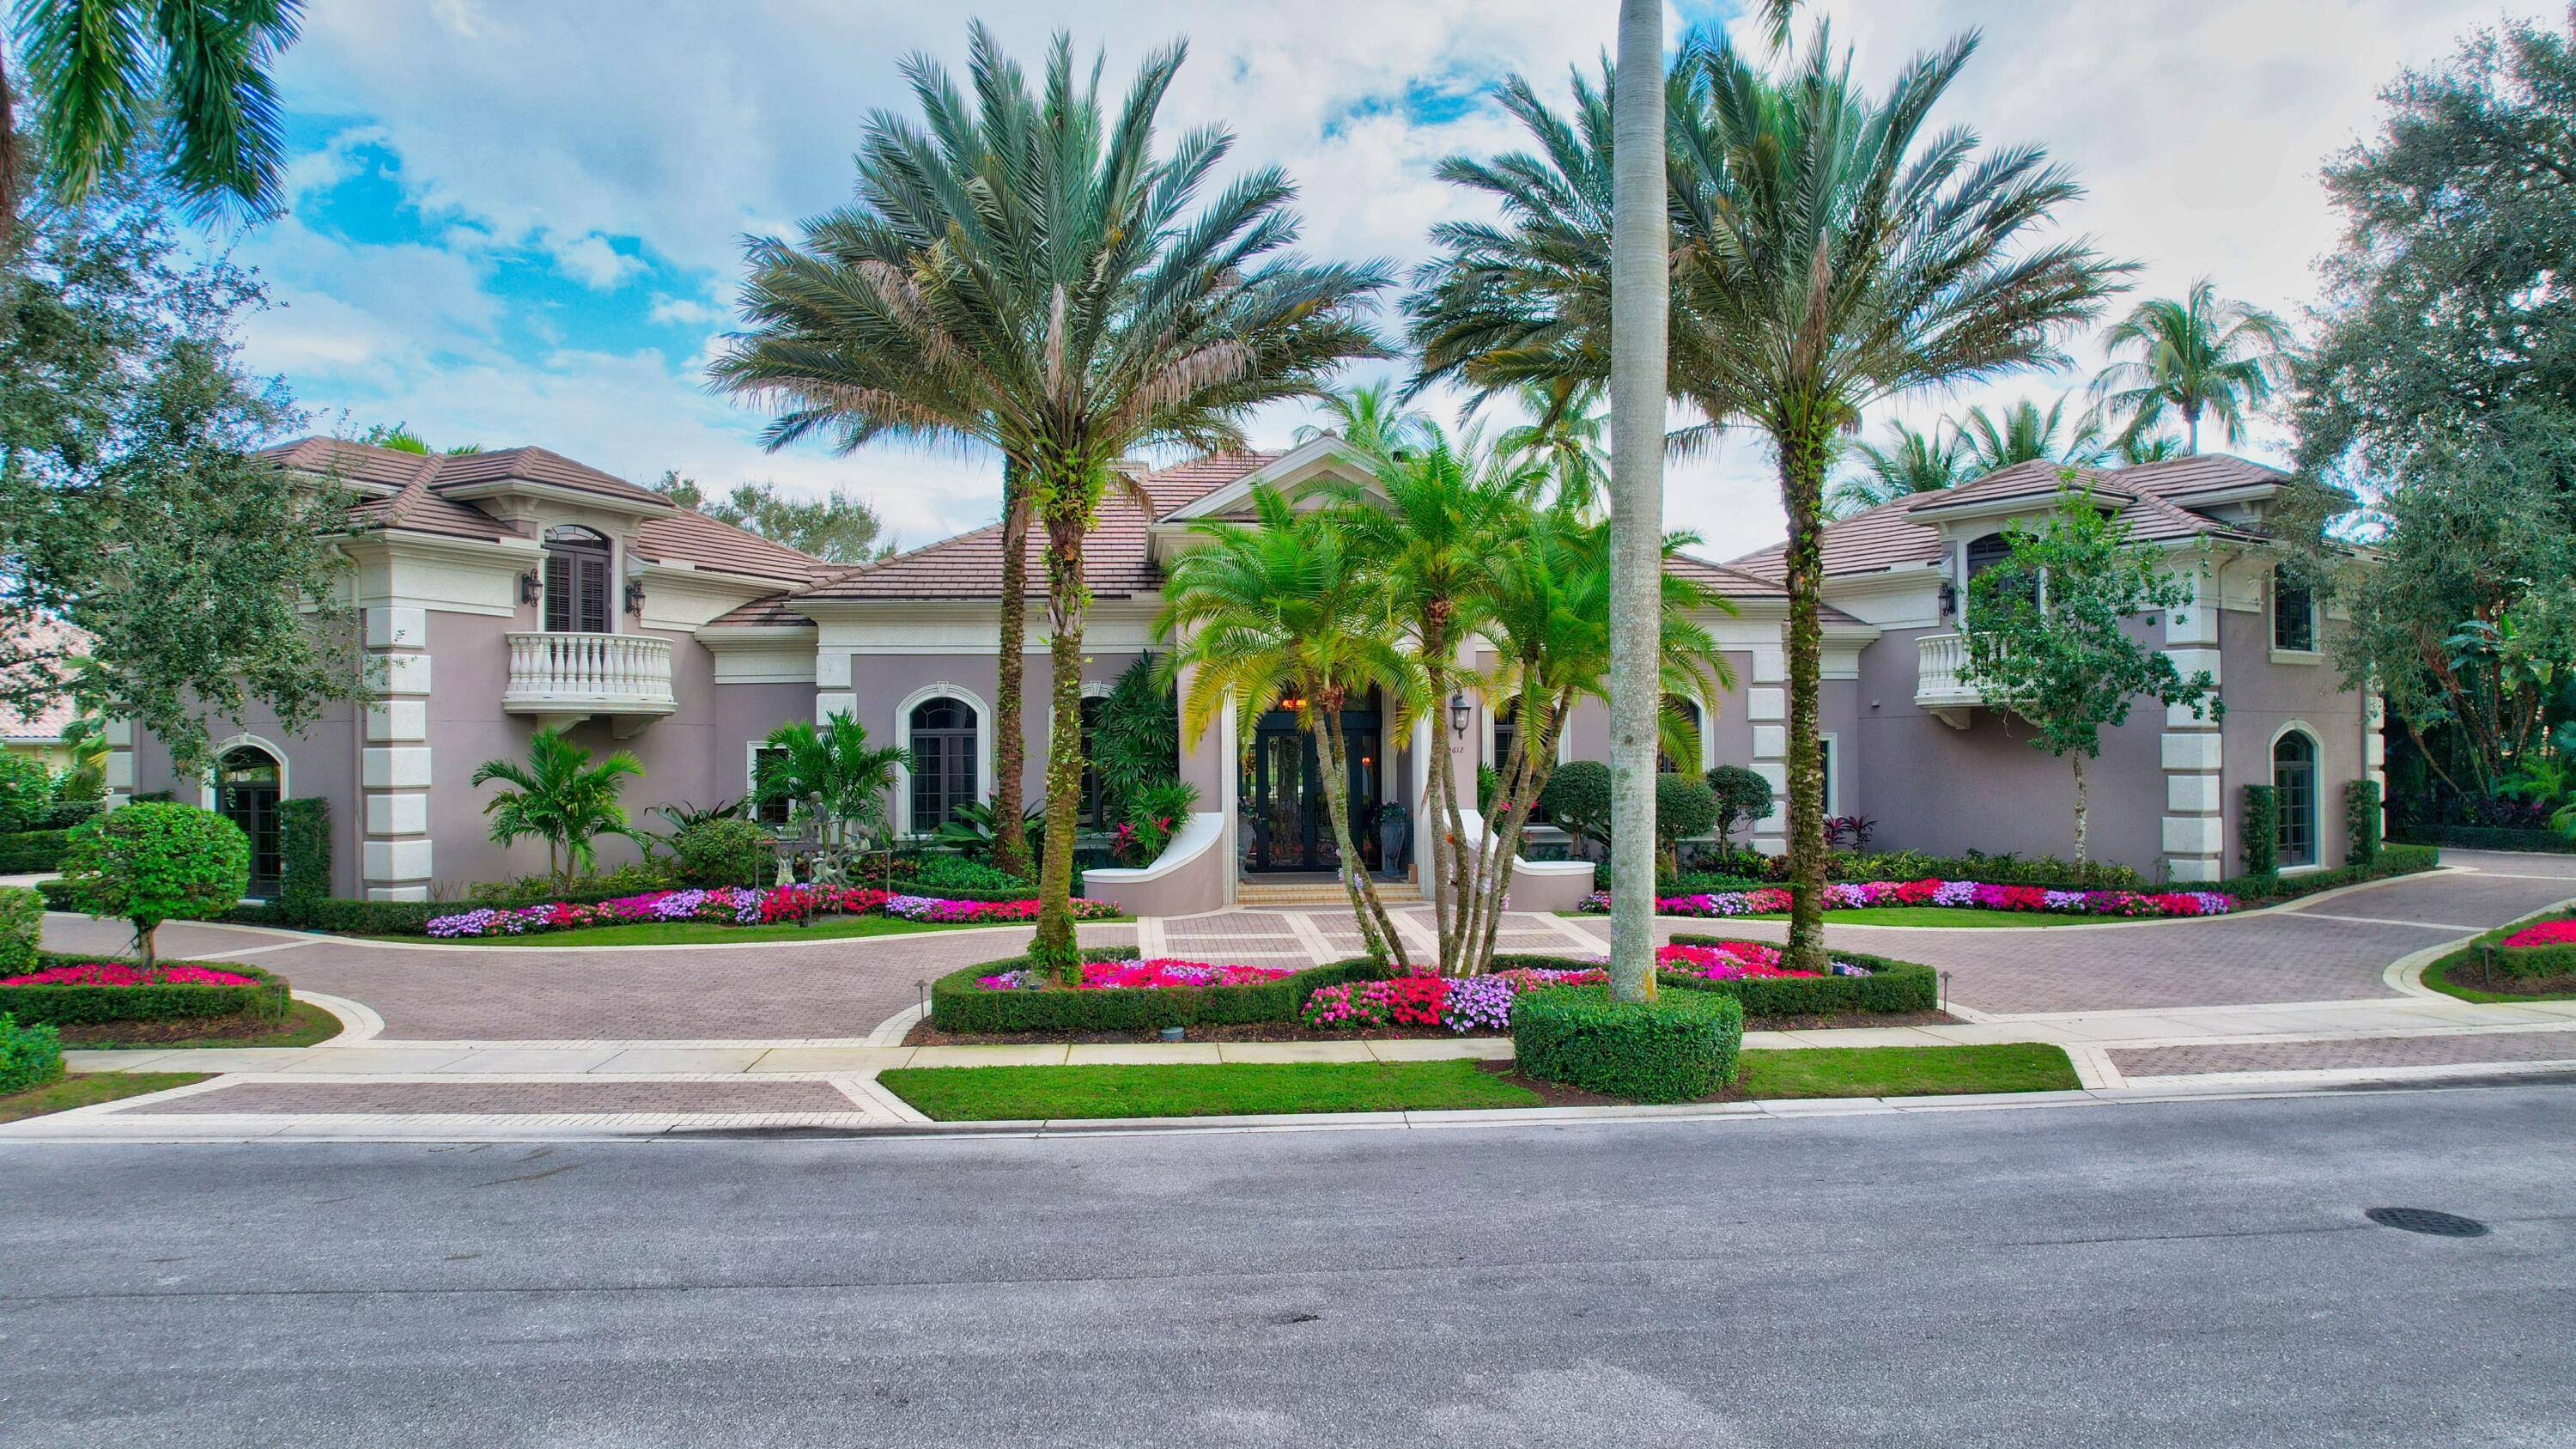 Situated on a double lot with expansive lake views, highly coveted enclave of Grand Oaks in Broken Sound Country Club, this residence designed by the award winning Affinity Architects exudes ...